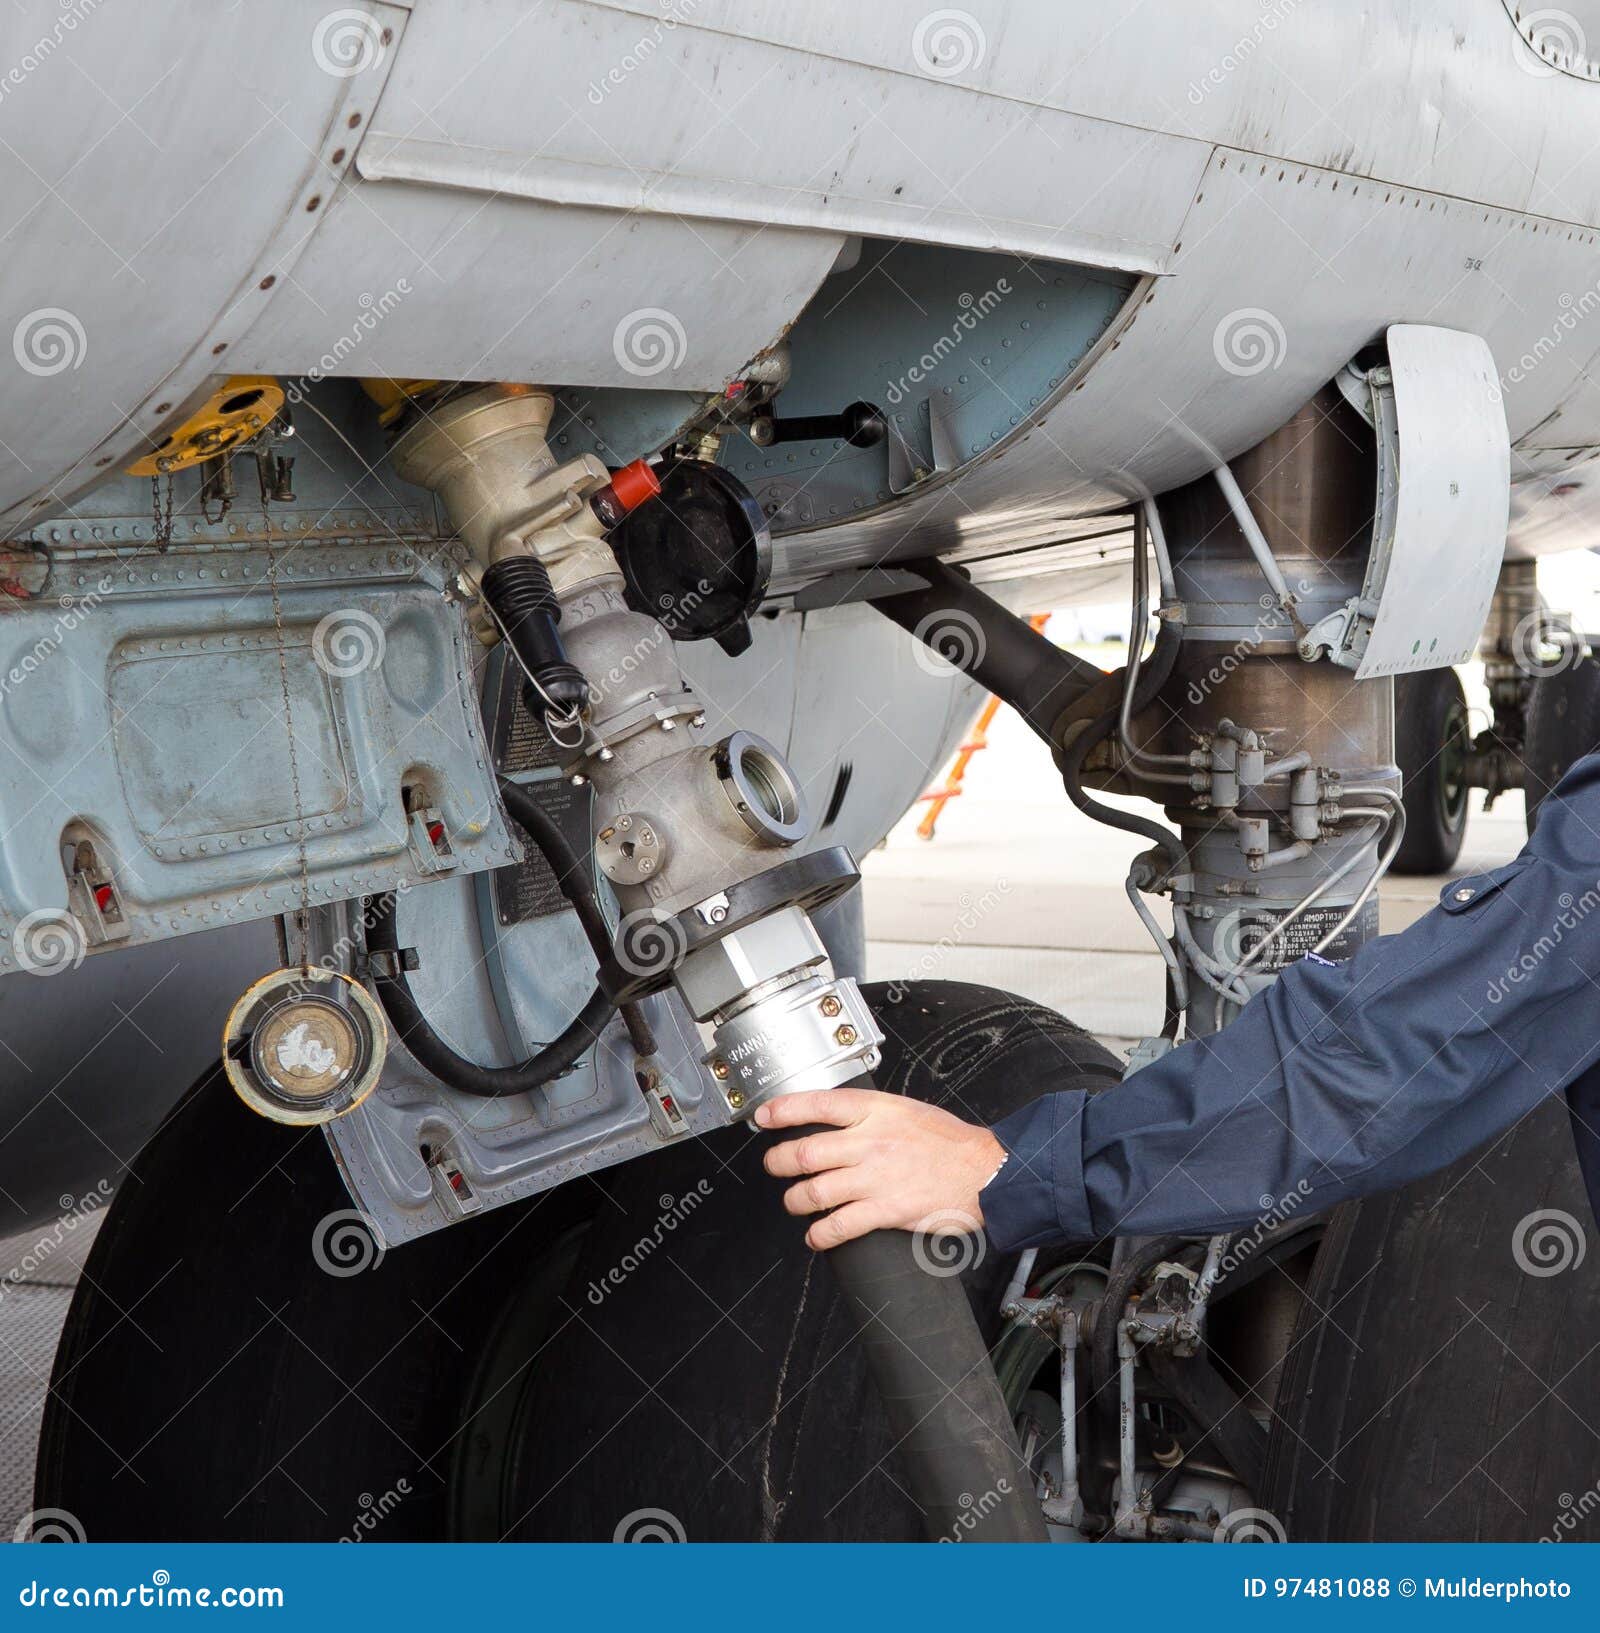 The Process Of Refueling Airplane In Airport. Fuel Hose Is Inserted Stock Photo Image of